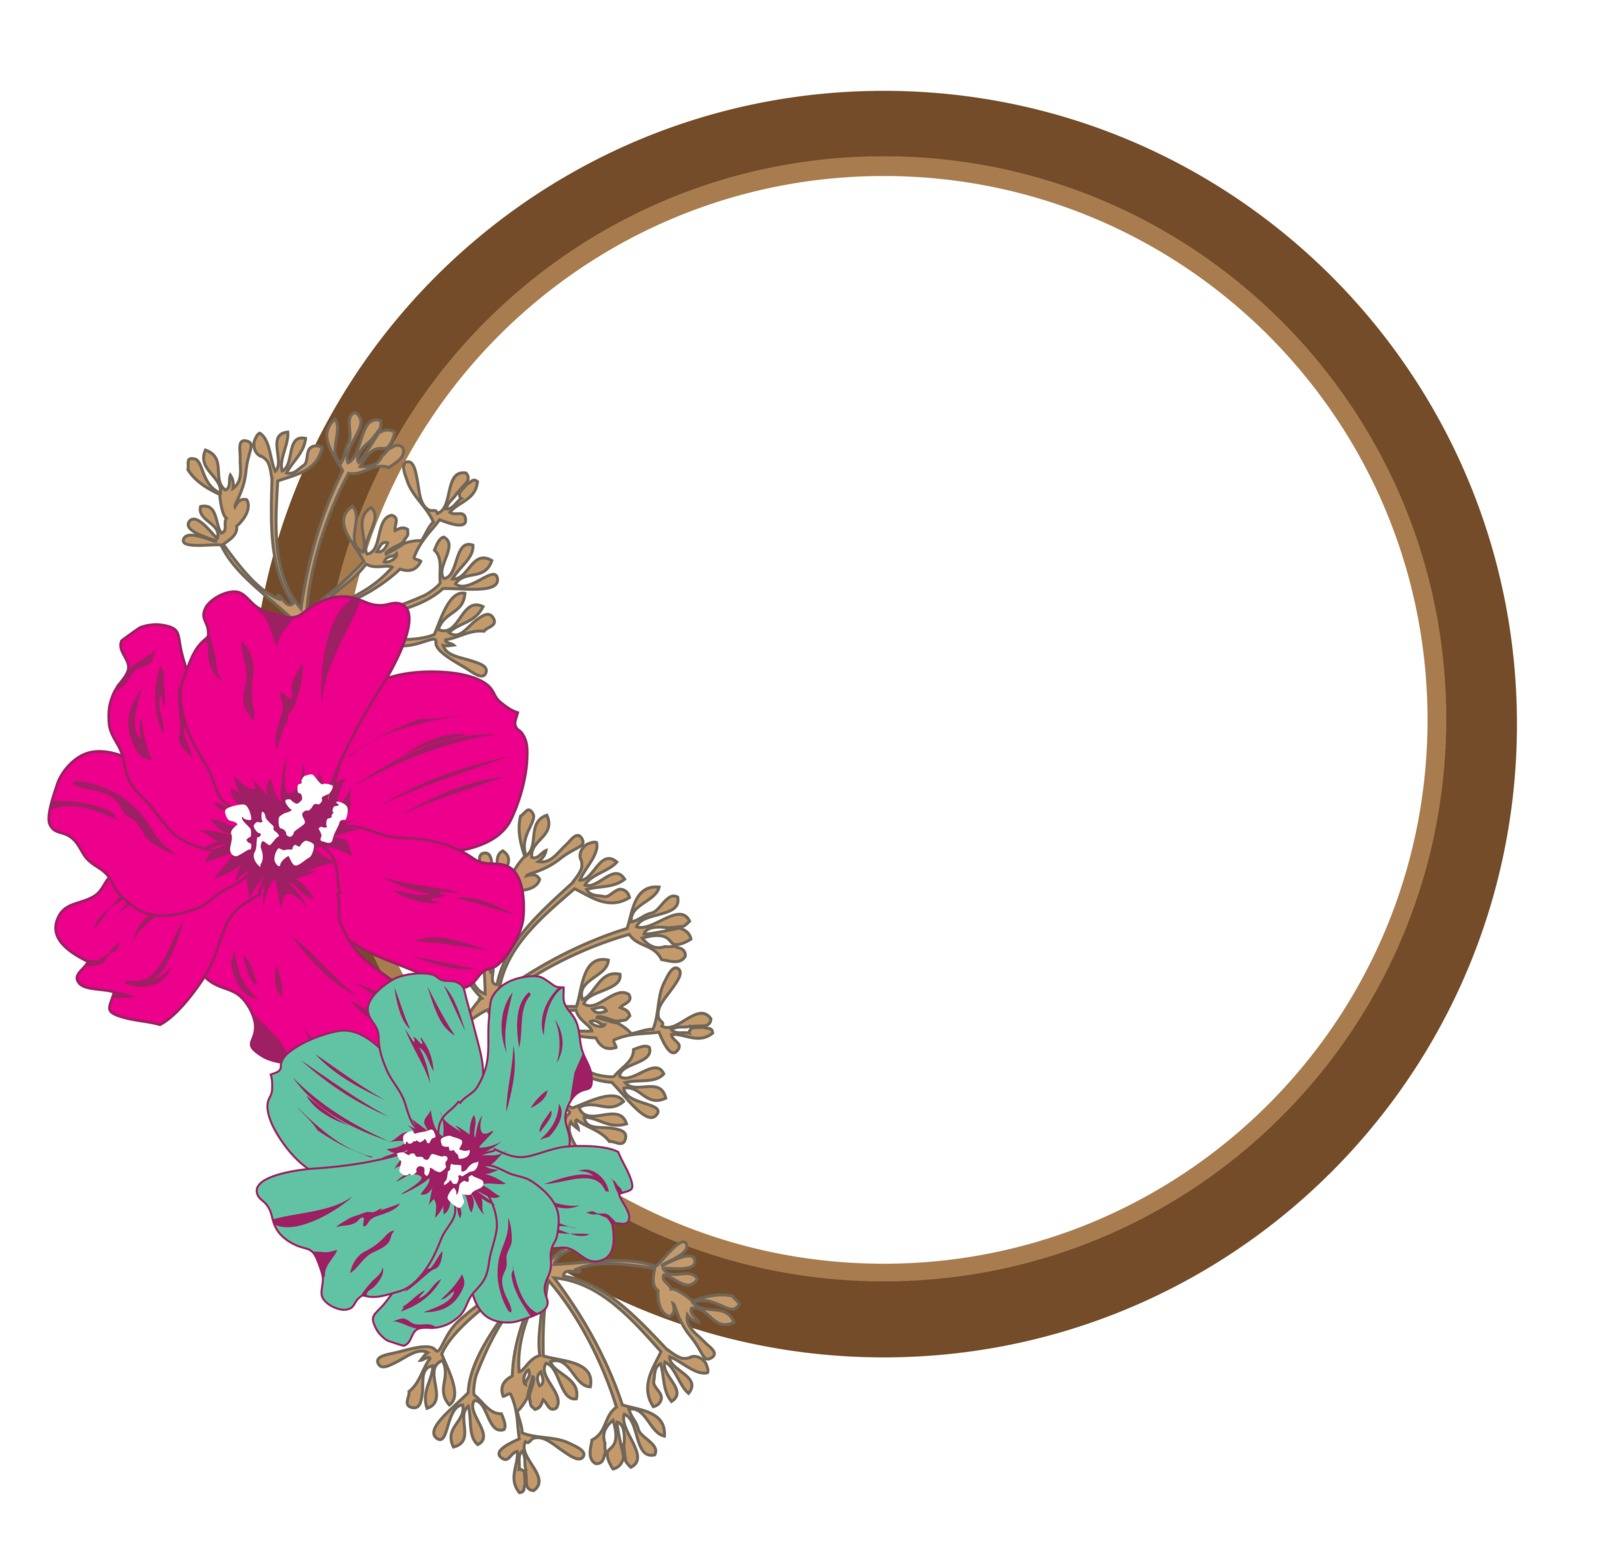 vector illustration of a mirror with vintage flowers